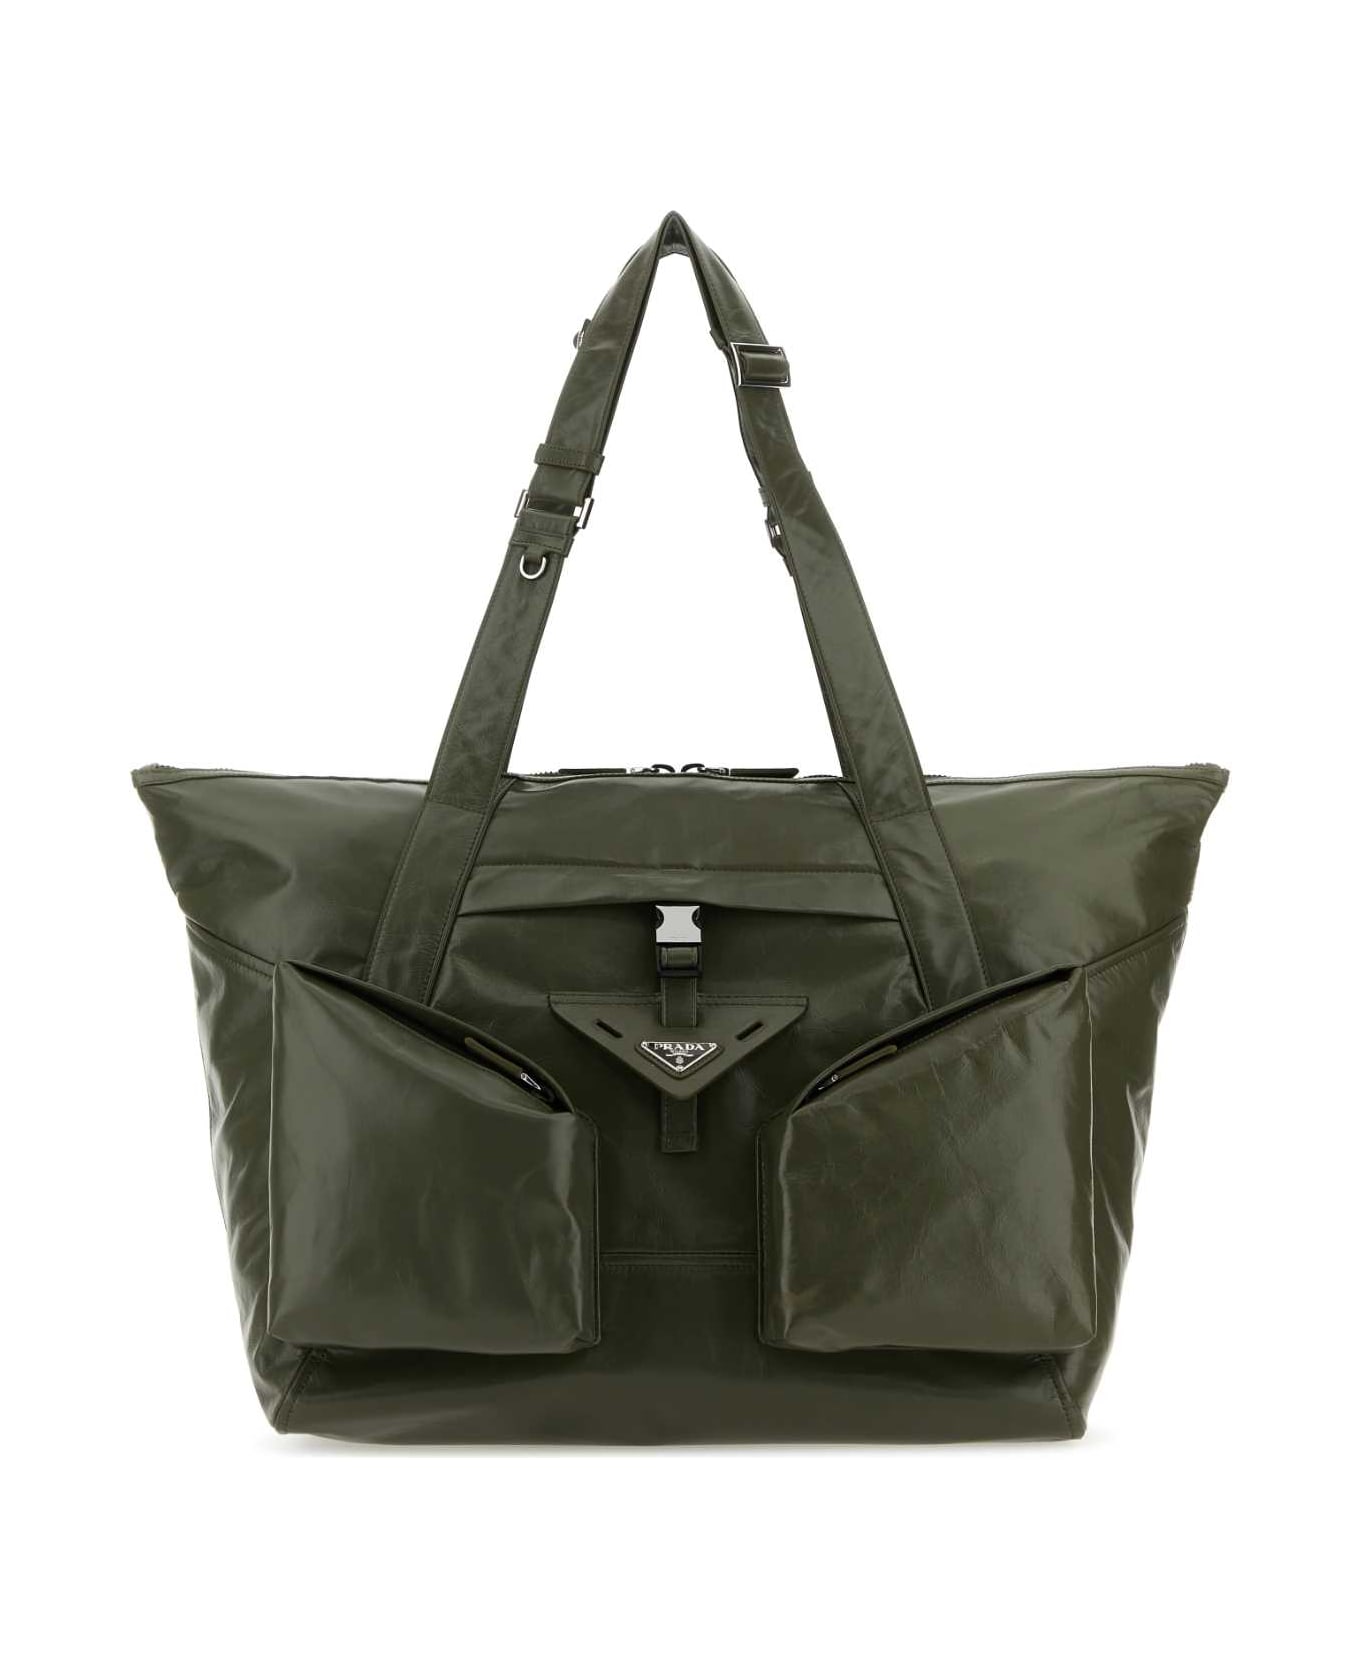 Prada Olive Green Leather Shopping Bag - LODEN